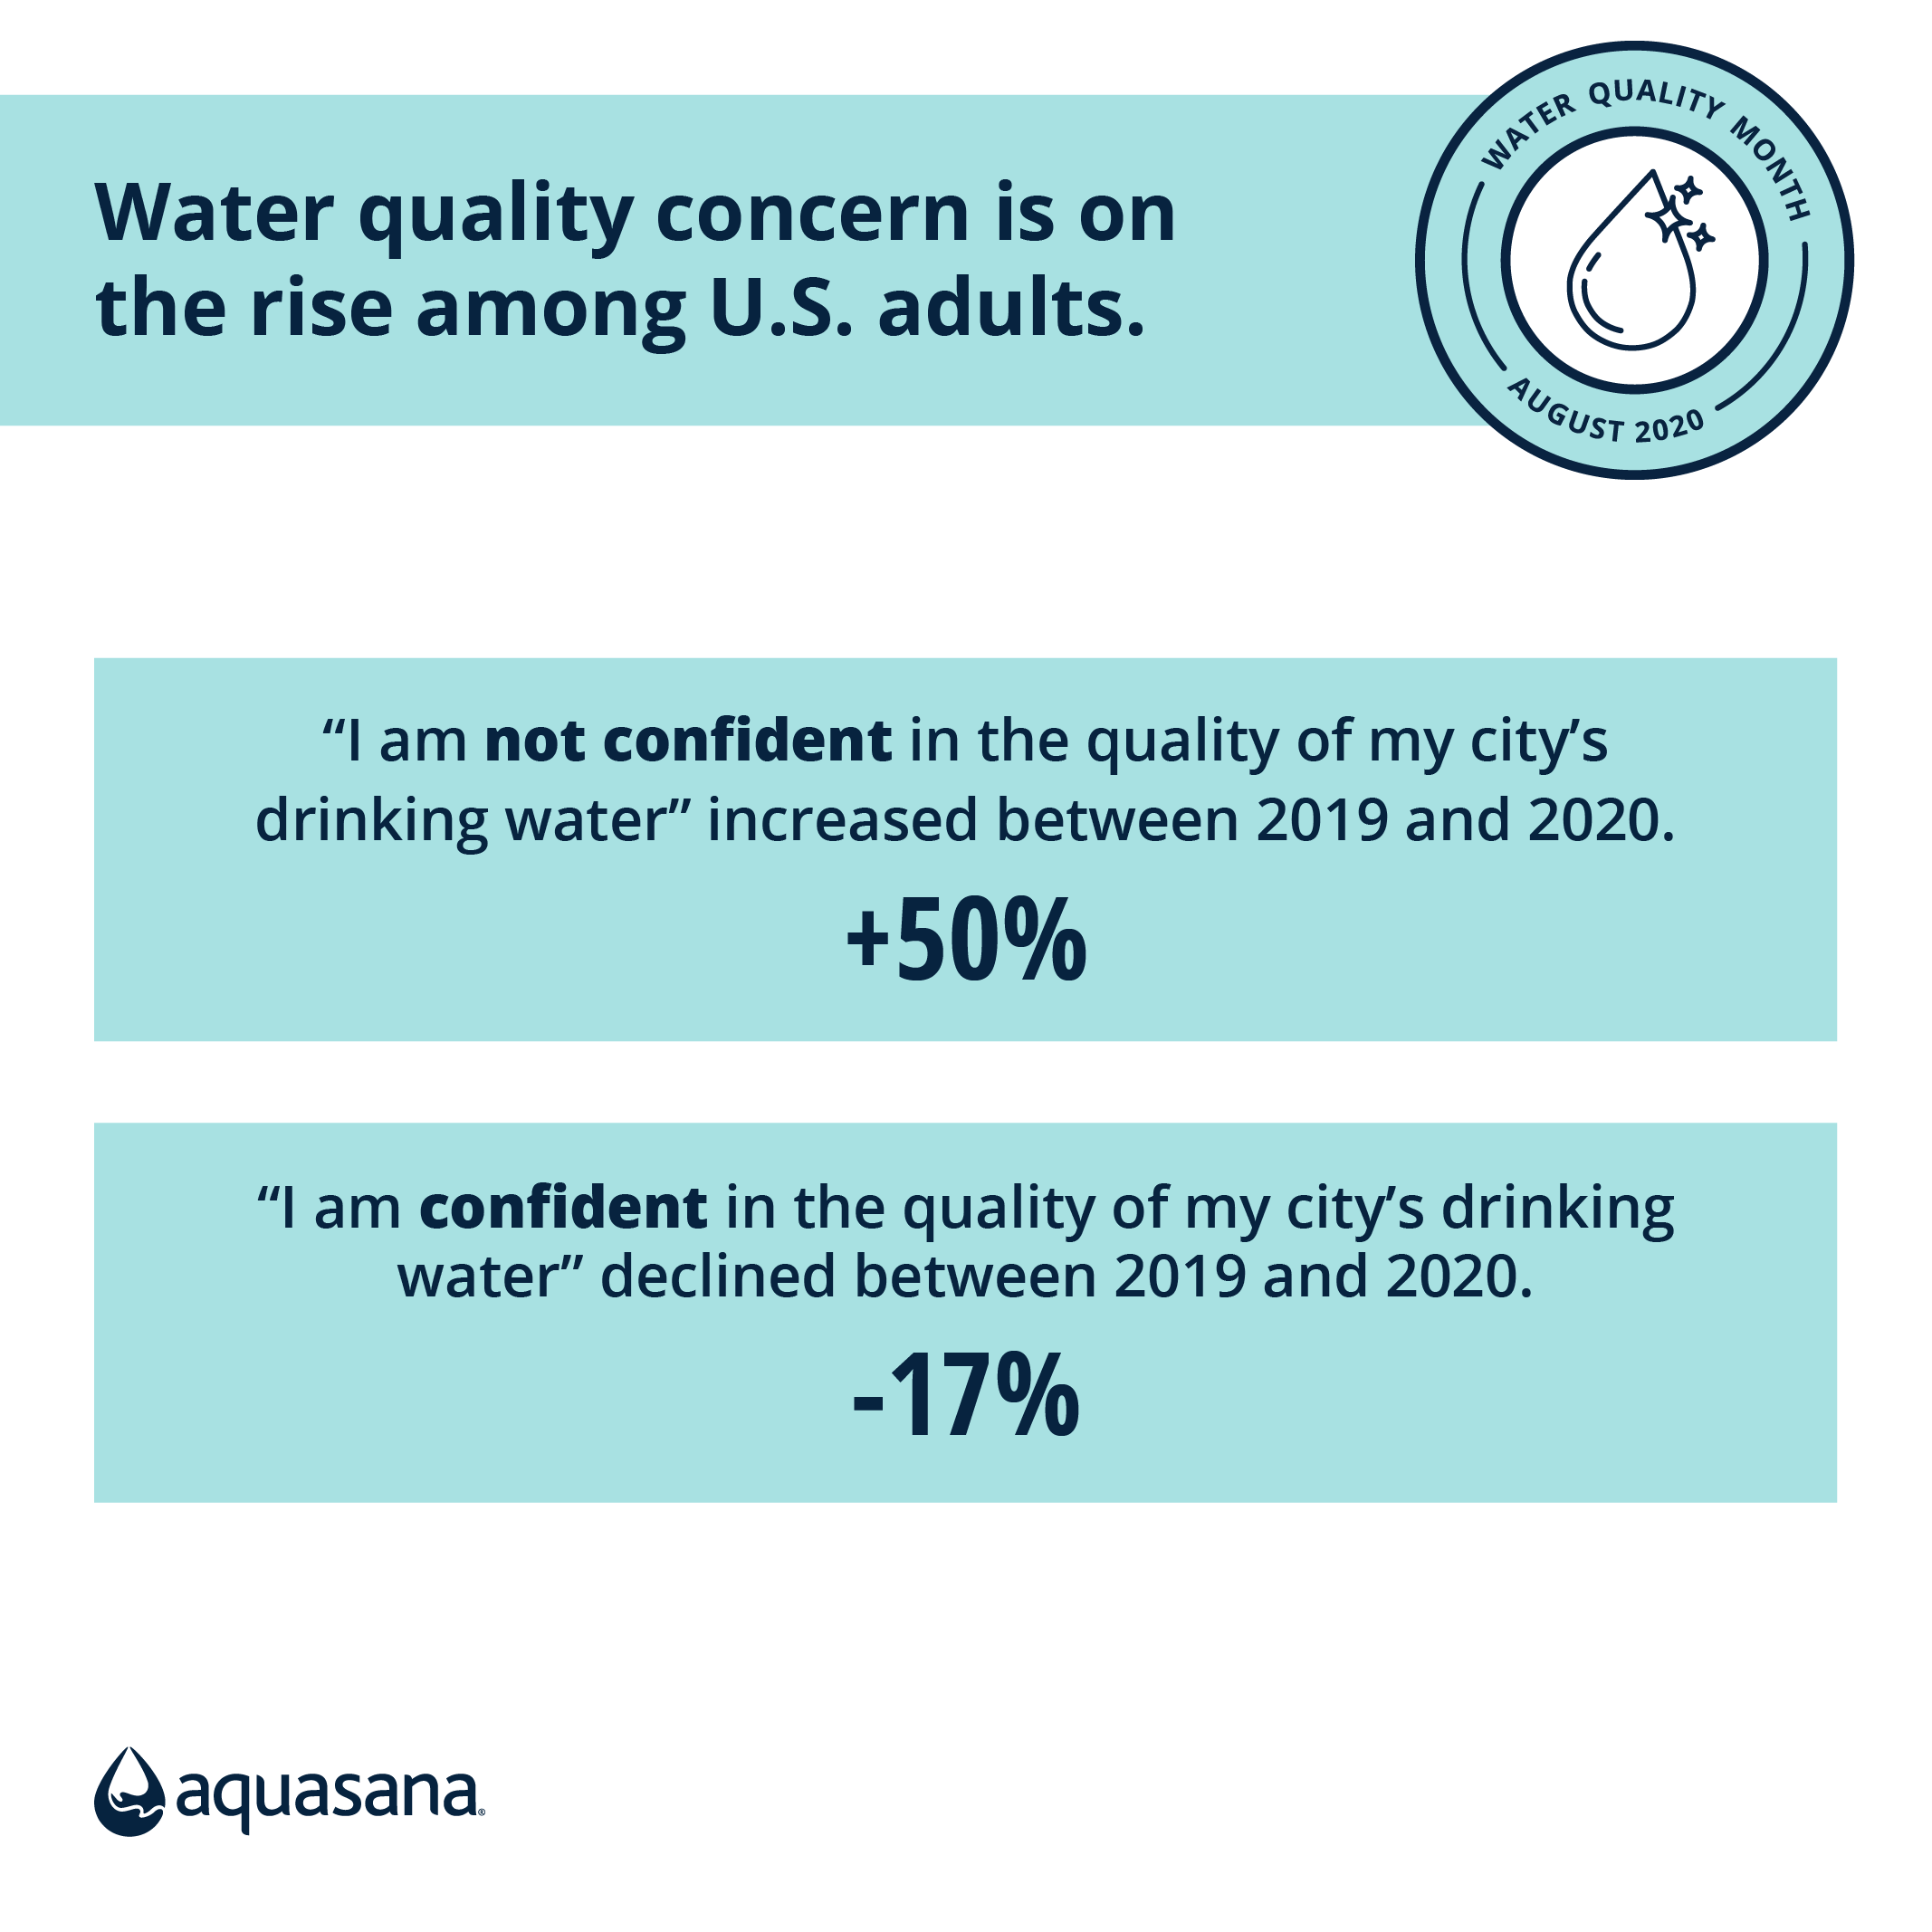 Water quality concern is on the rise among U.S. adults.